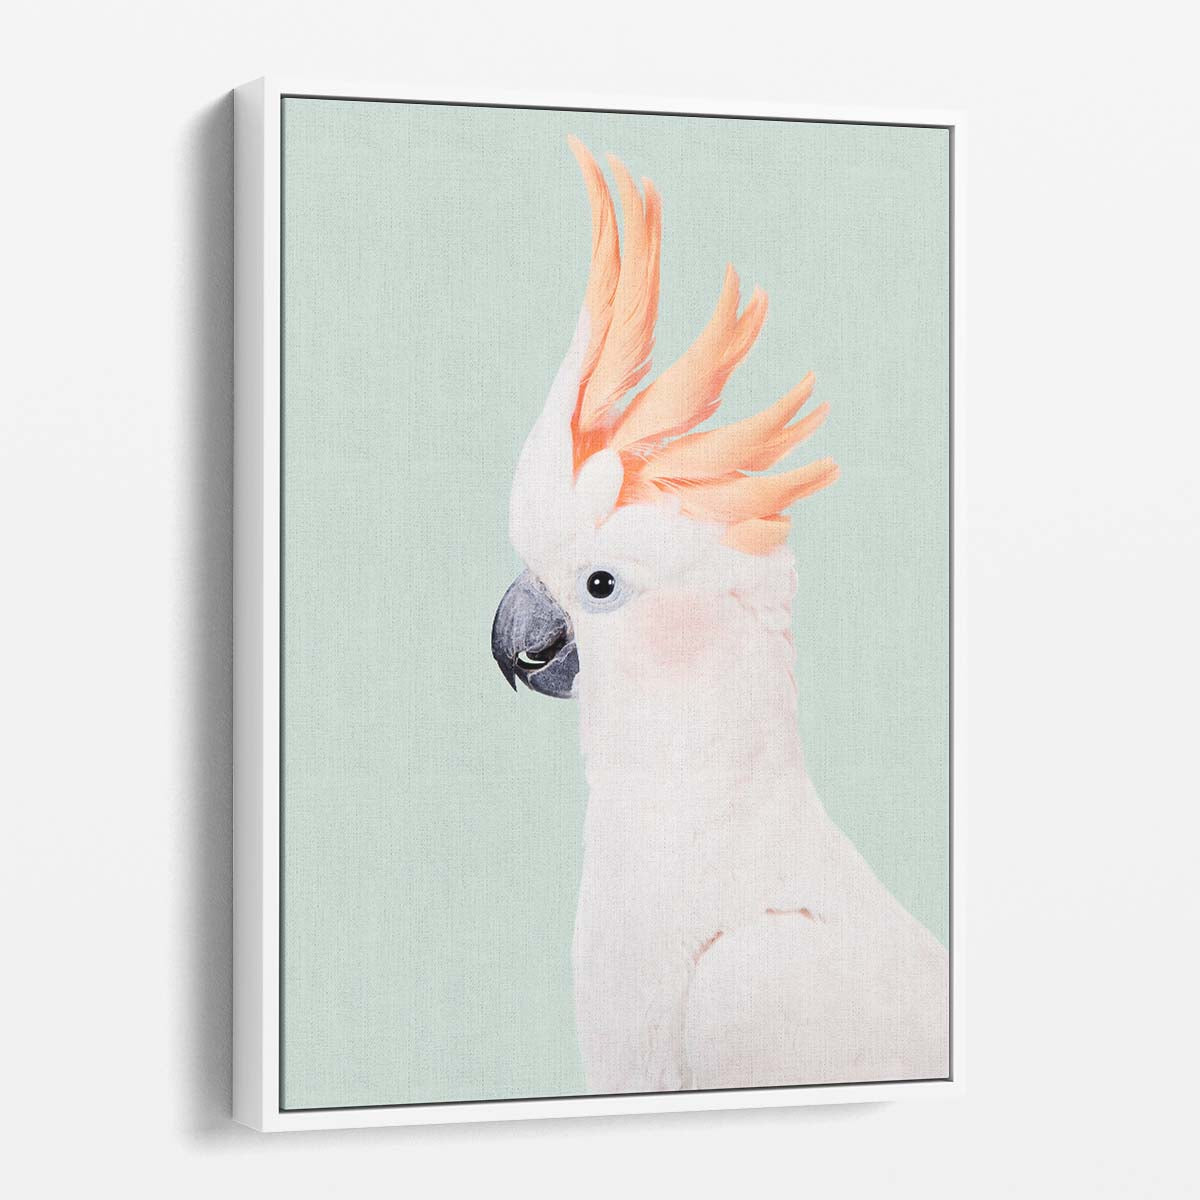 Sulphur-Crested Cockatoo Bird Photography Art by Kathrin Pienaar by Luxuriance Designs, made in USA